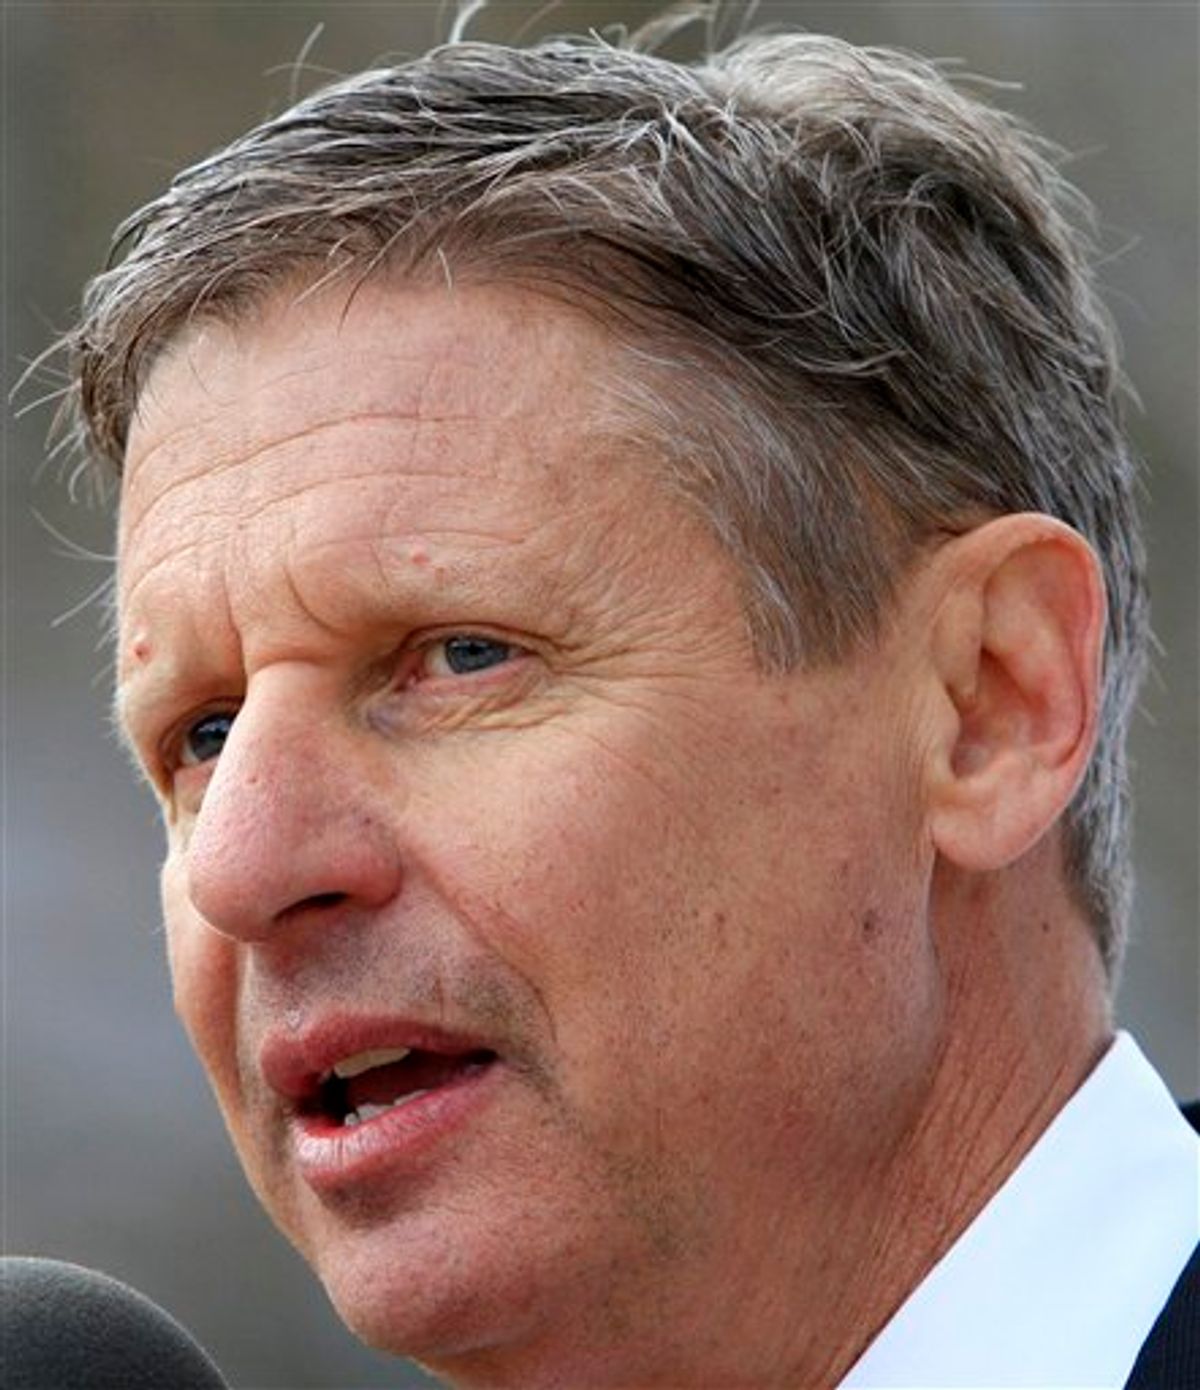 Former New Mexico Gov. Gary Johnson announces his plans to seek the Republican nomination for president in front of the Statehouse Thursday, April 21, 2011 in Concord, N.H. Johnson served as governor from 1995 through 2003. Before that, he started a one-person fix-it business that grew to 1,000 employees. He says he can fix the nation by asking two simple questions: What are we spending our money on? And what are we getting in return? (AP Photo/Jim Cole) (AP)